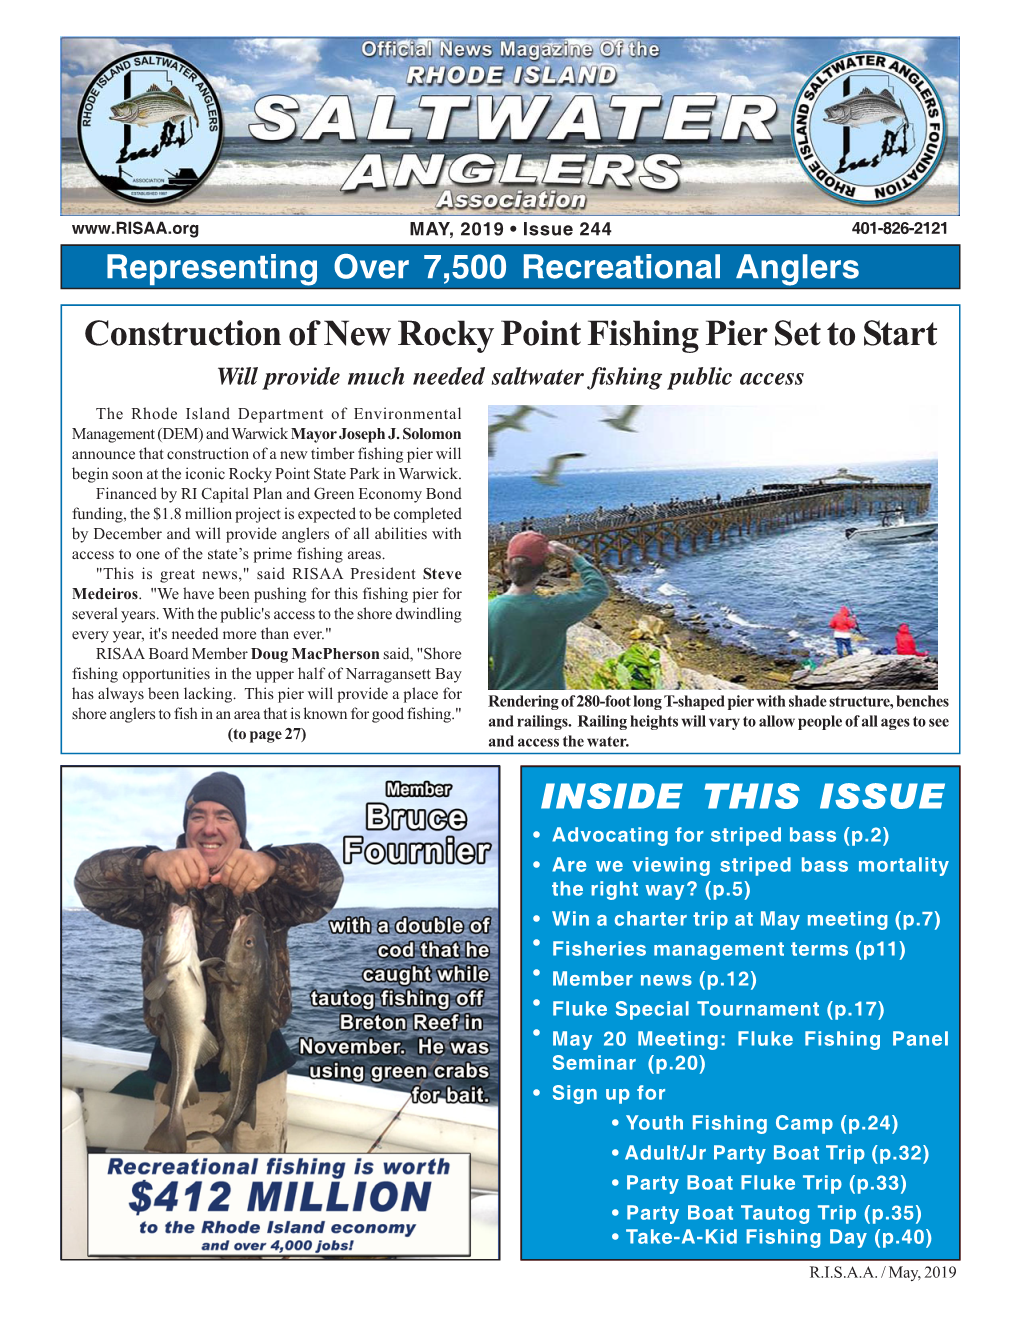 Construction of New Rocky Point Fishing Pier Set to Start